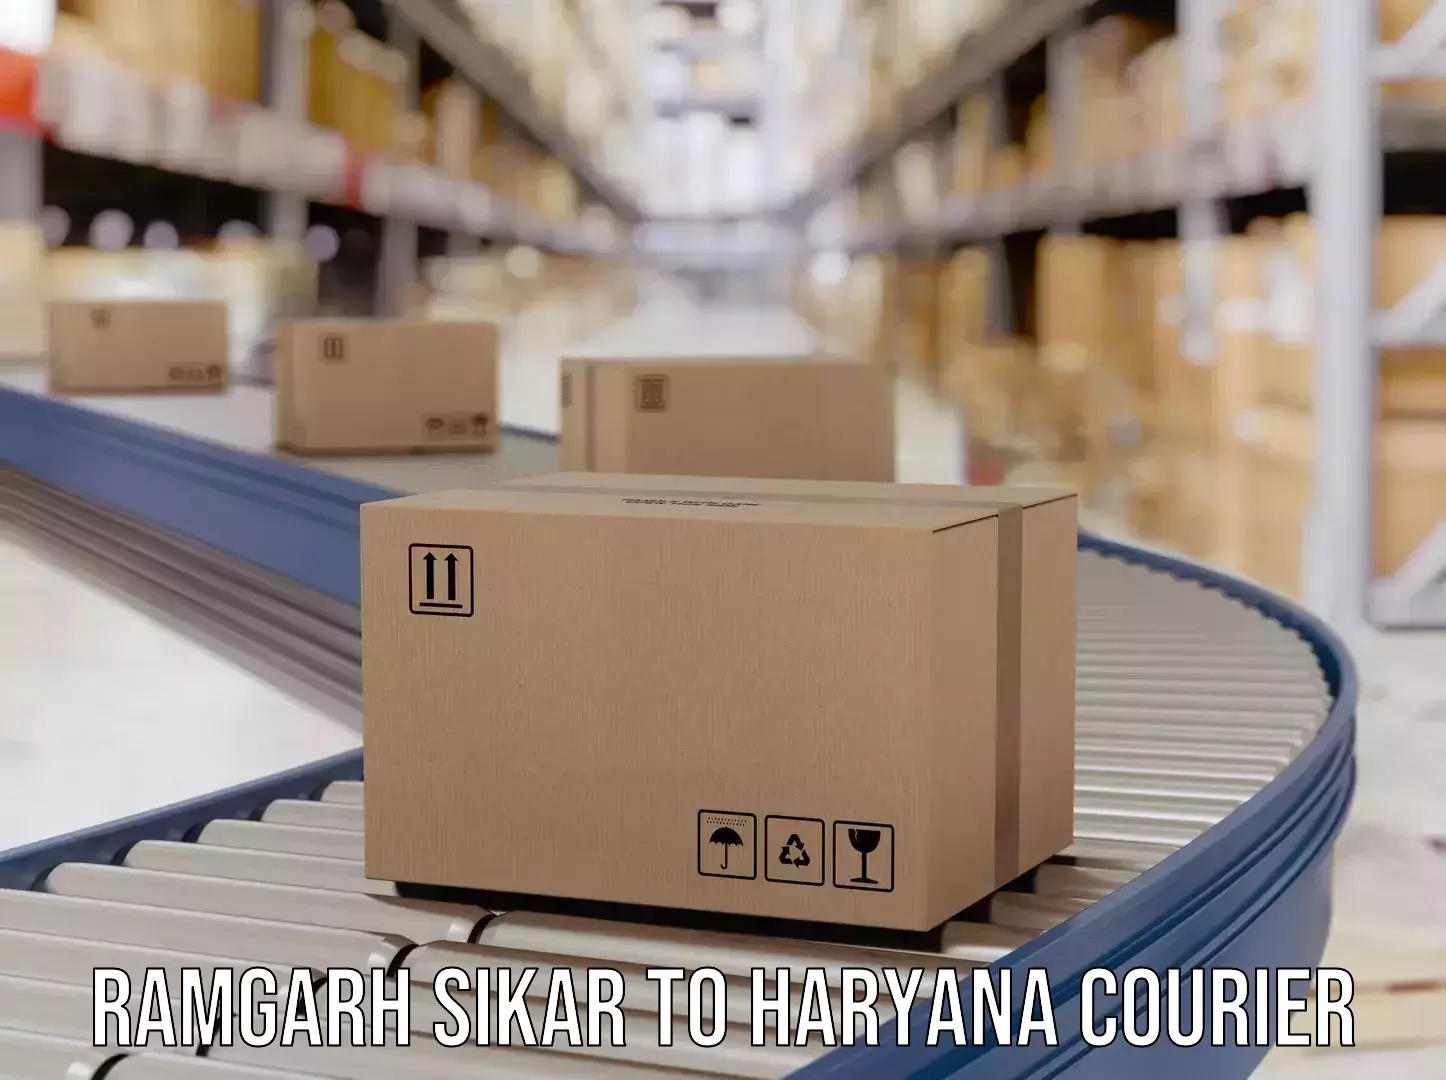 Pharmaceutical courier in Ramgarh Sikar to Faridabad